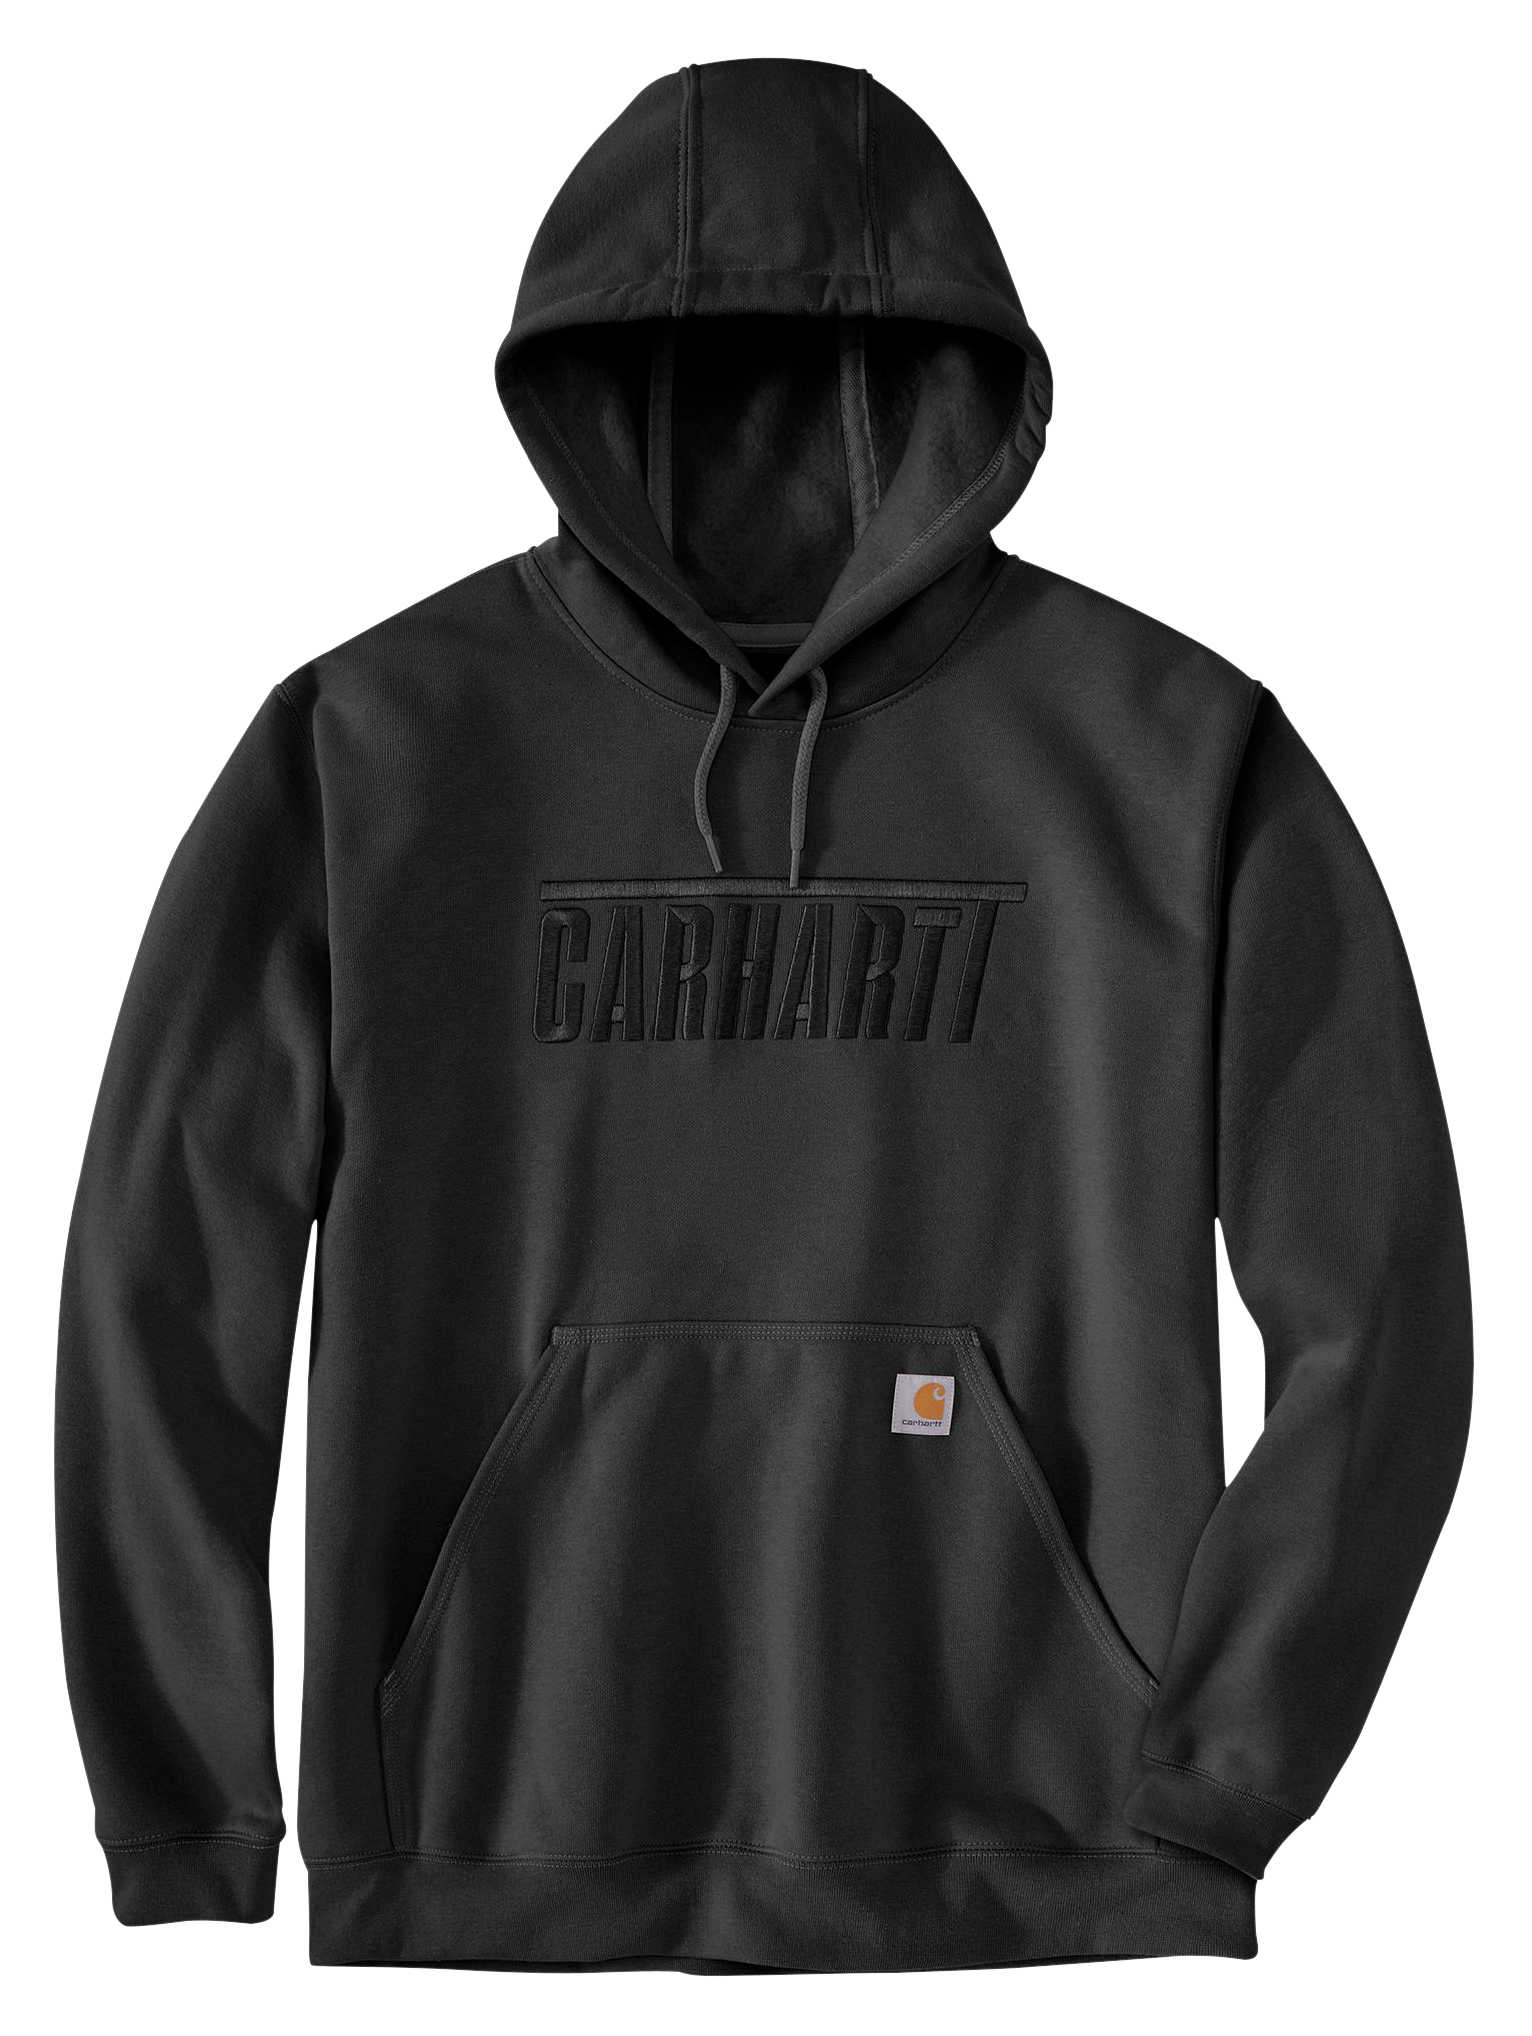 Carhartt Embroidered Logo Hoodie, Shop Now at Pseudio!